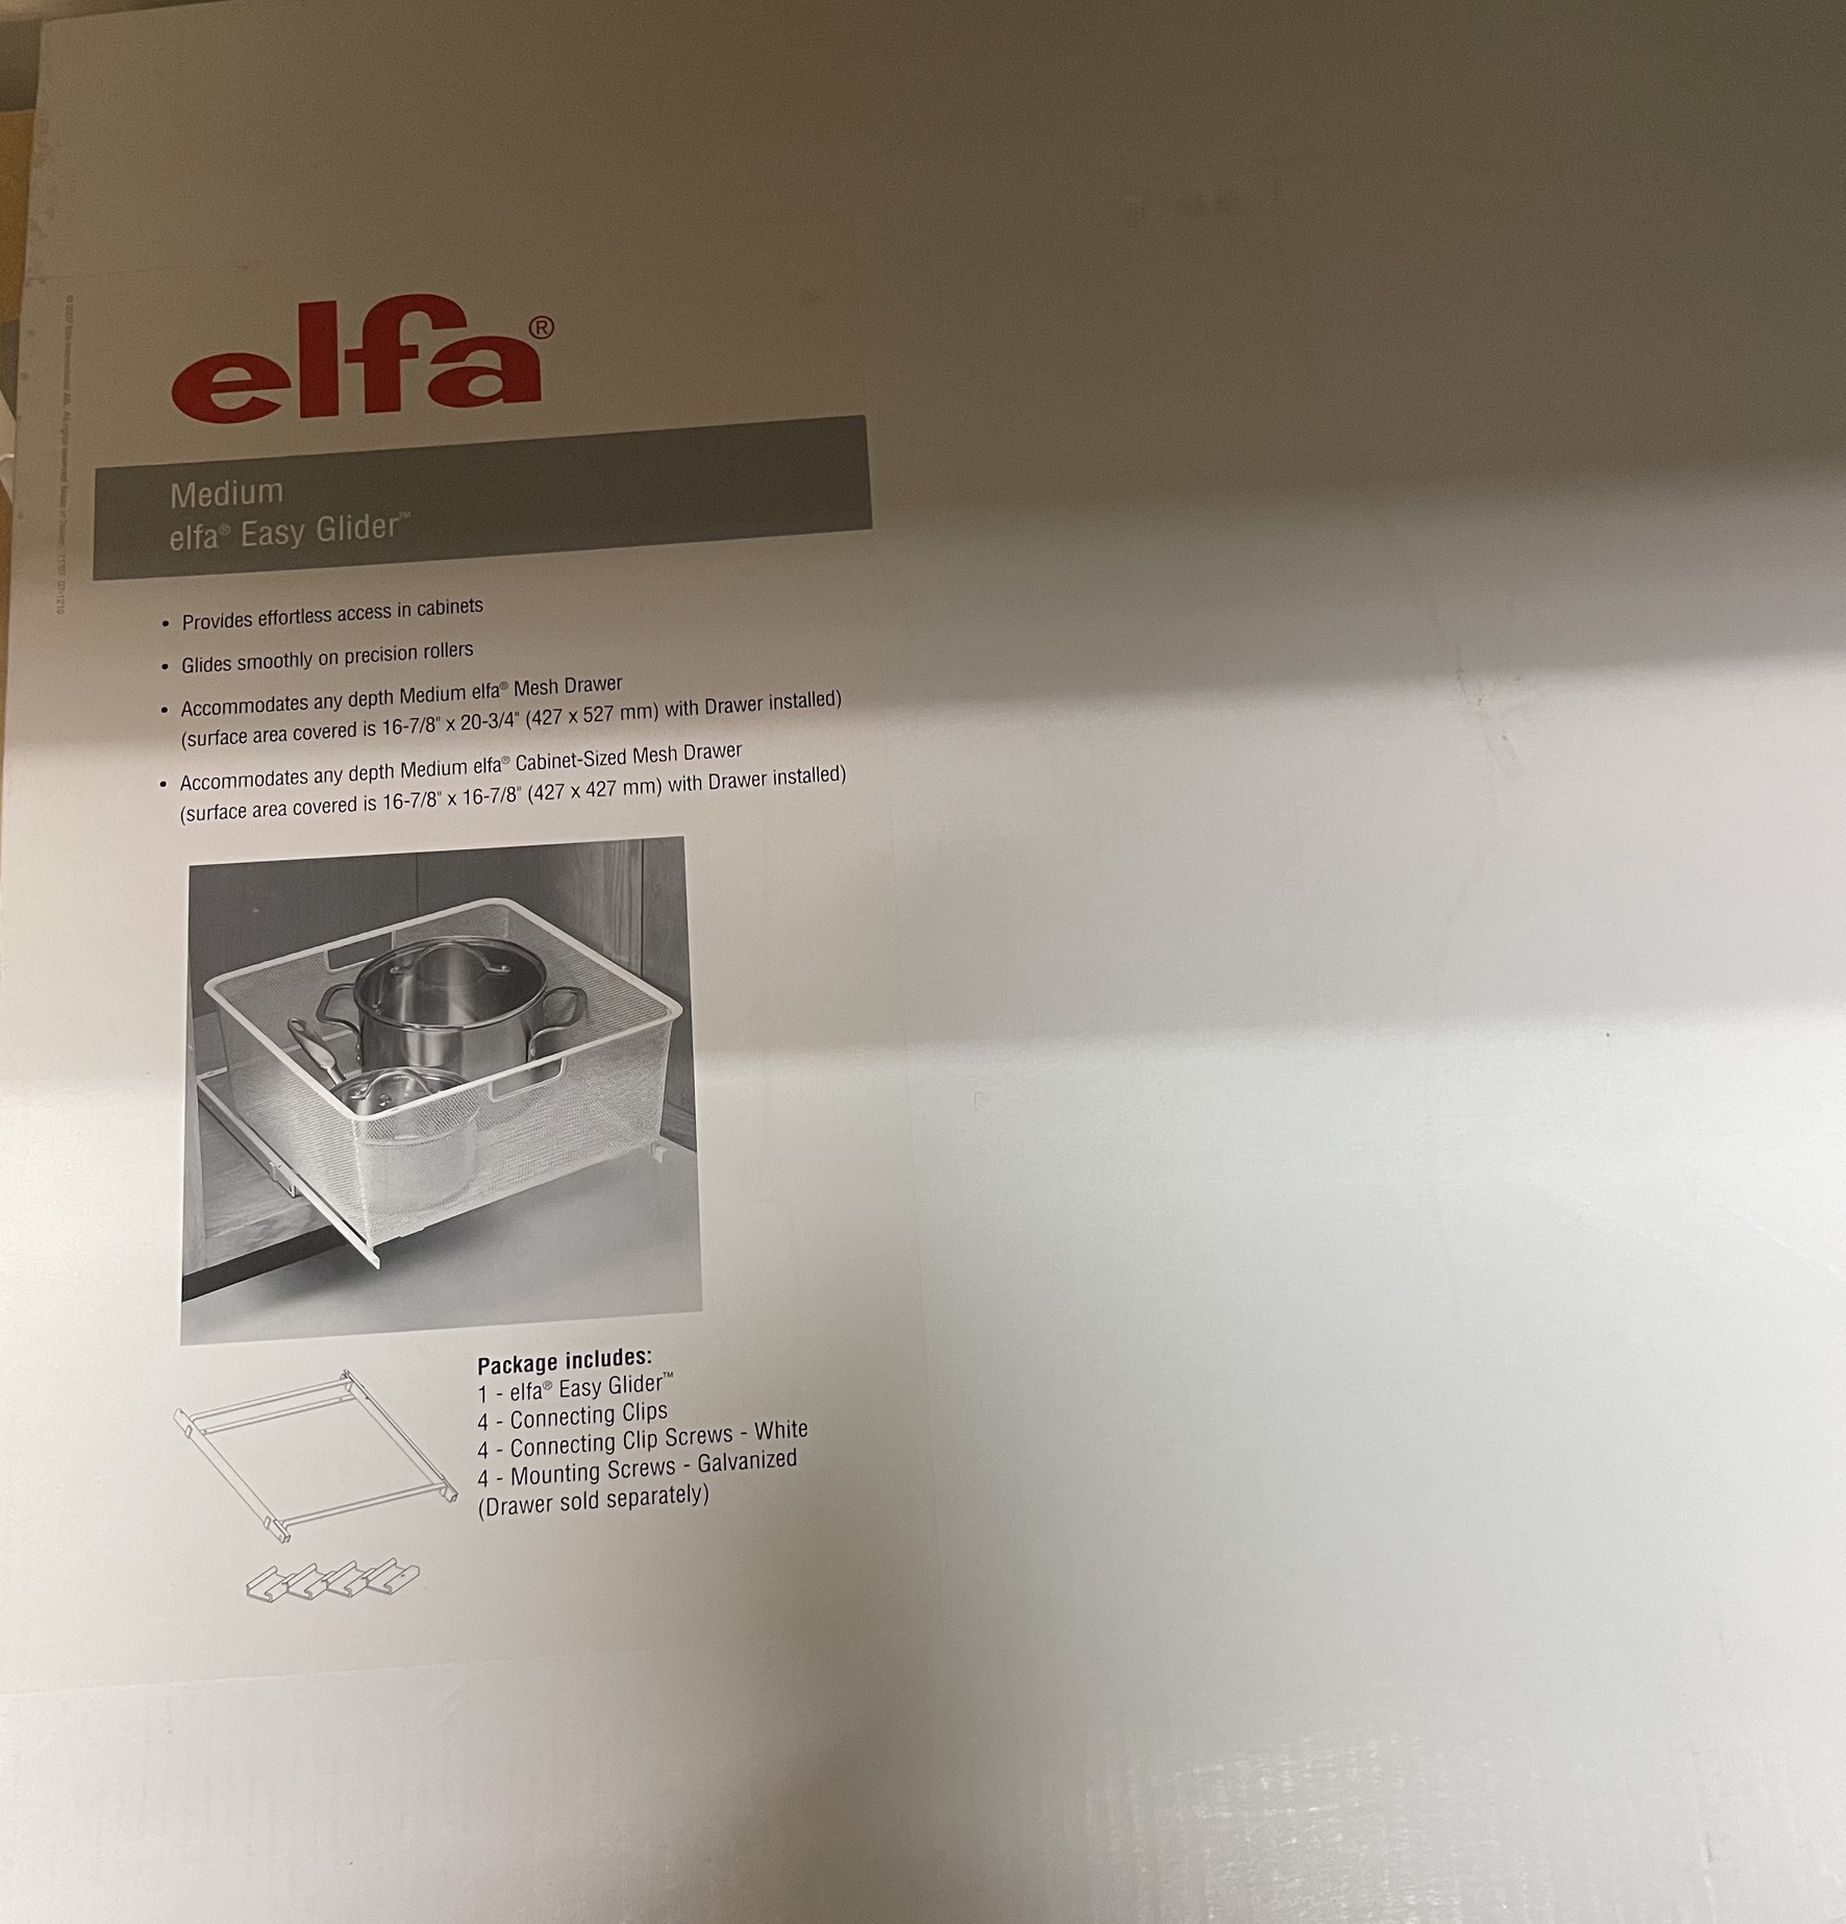 Hardware For Elfa Inside Cabinet Drawers New In Box